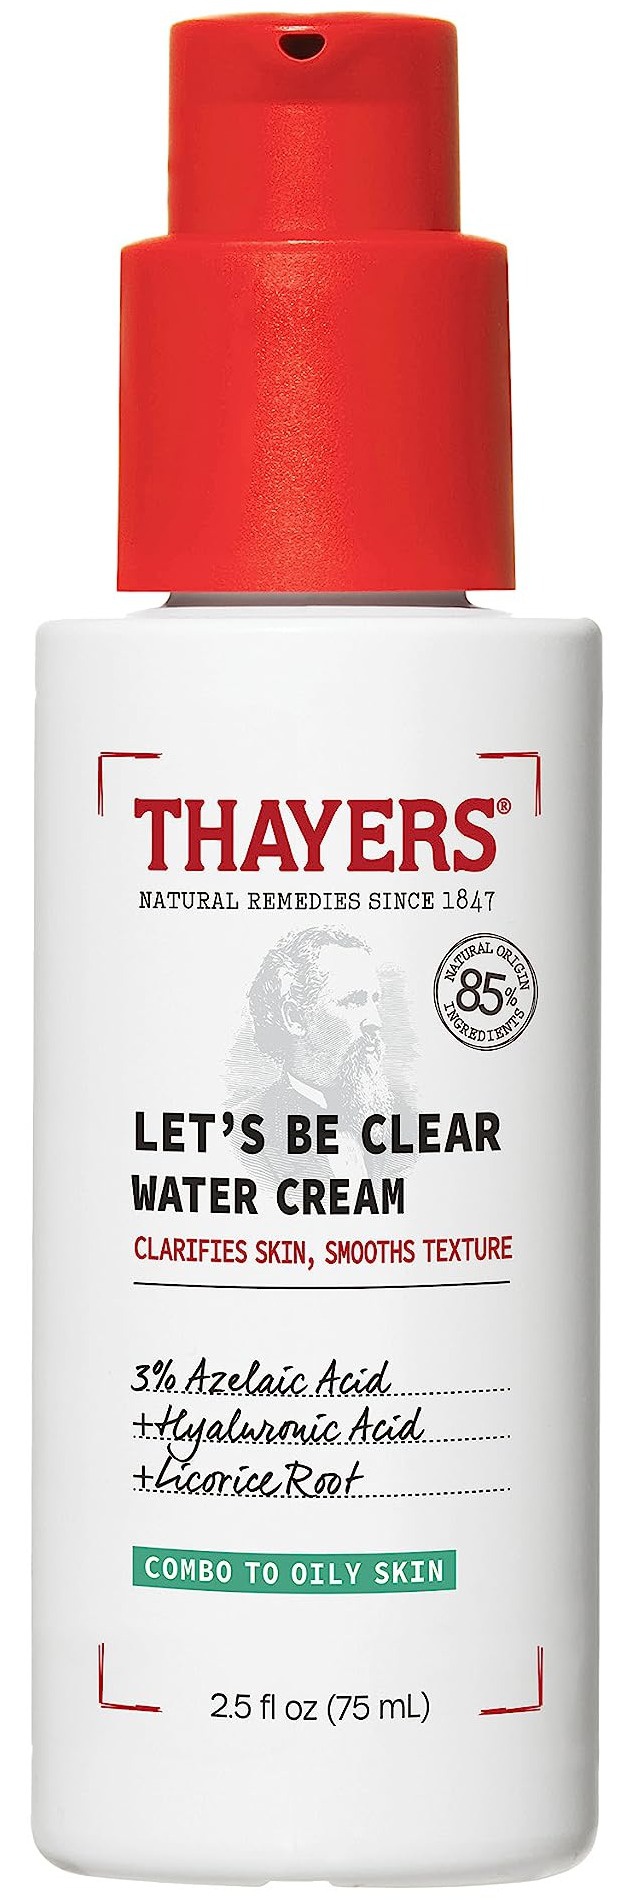 Thayers Let's Be Clear Water Cream